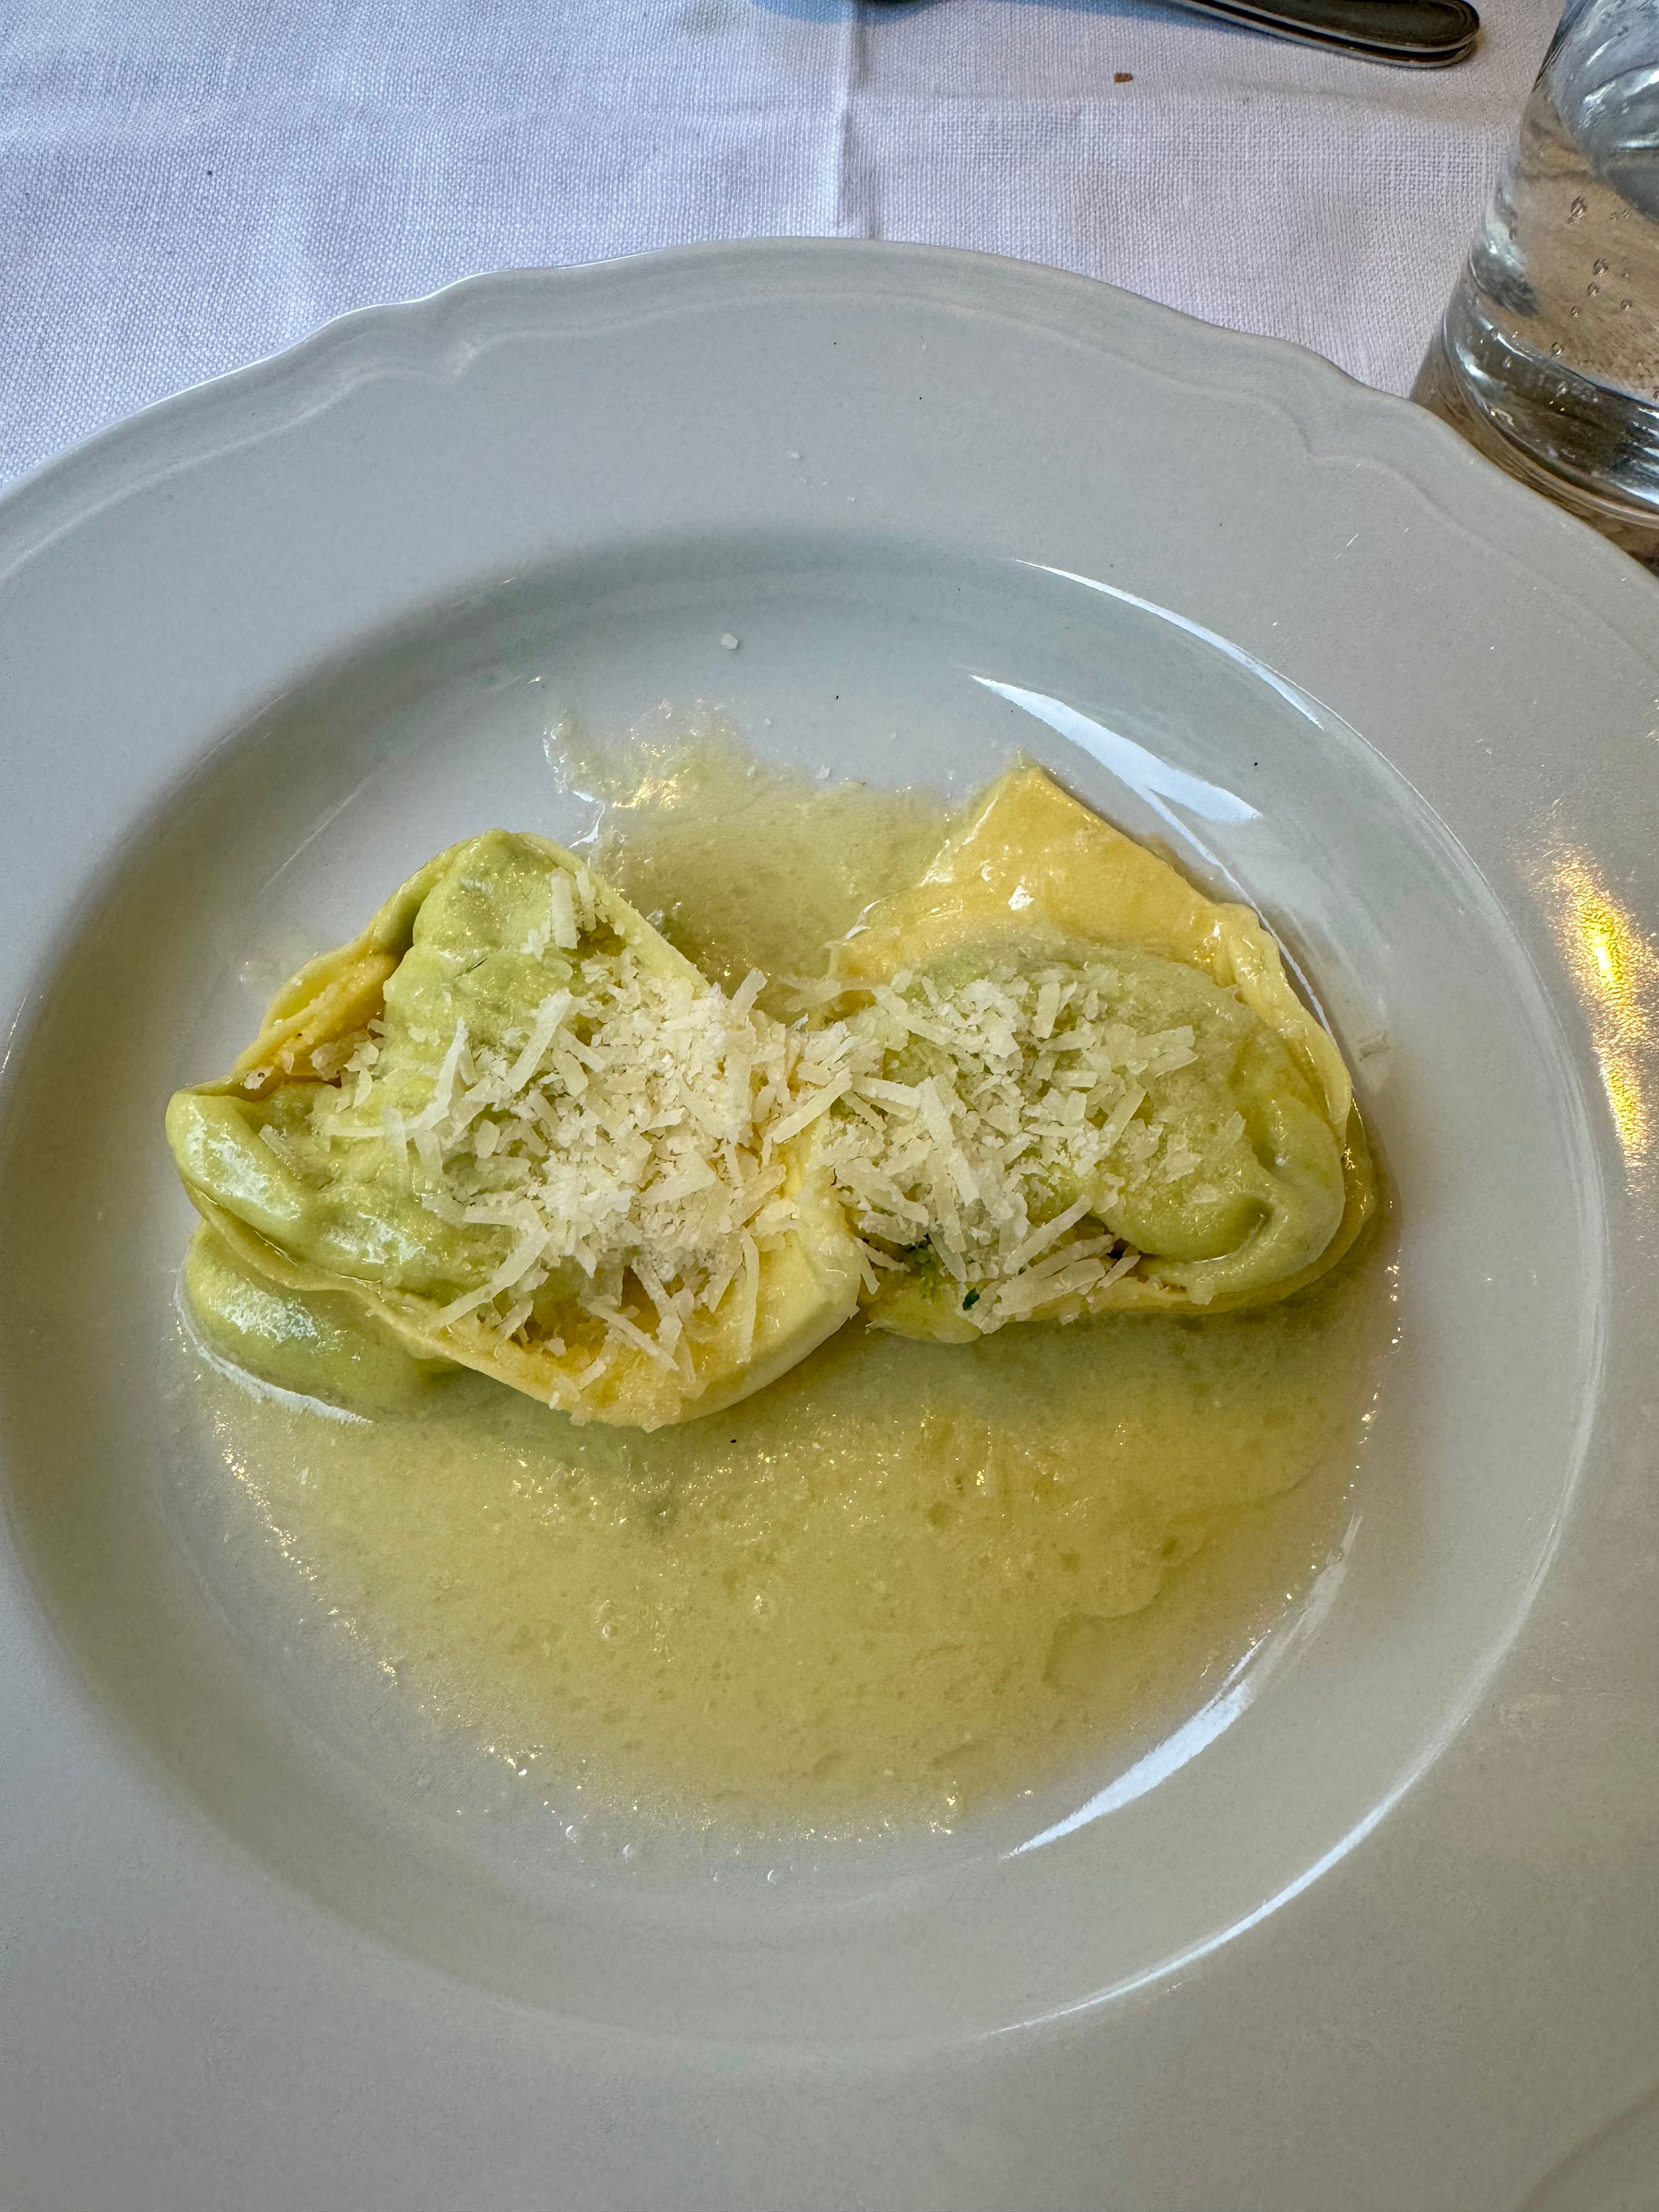 A plate of green and yellow tortelloni with grated cheese on top, served with light sauce on a white plate.